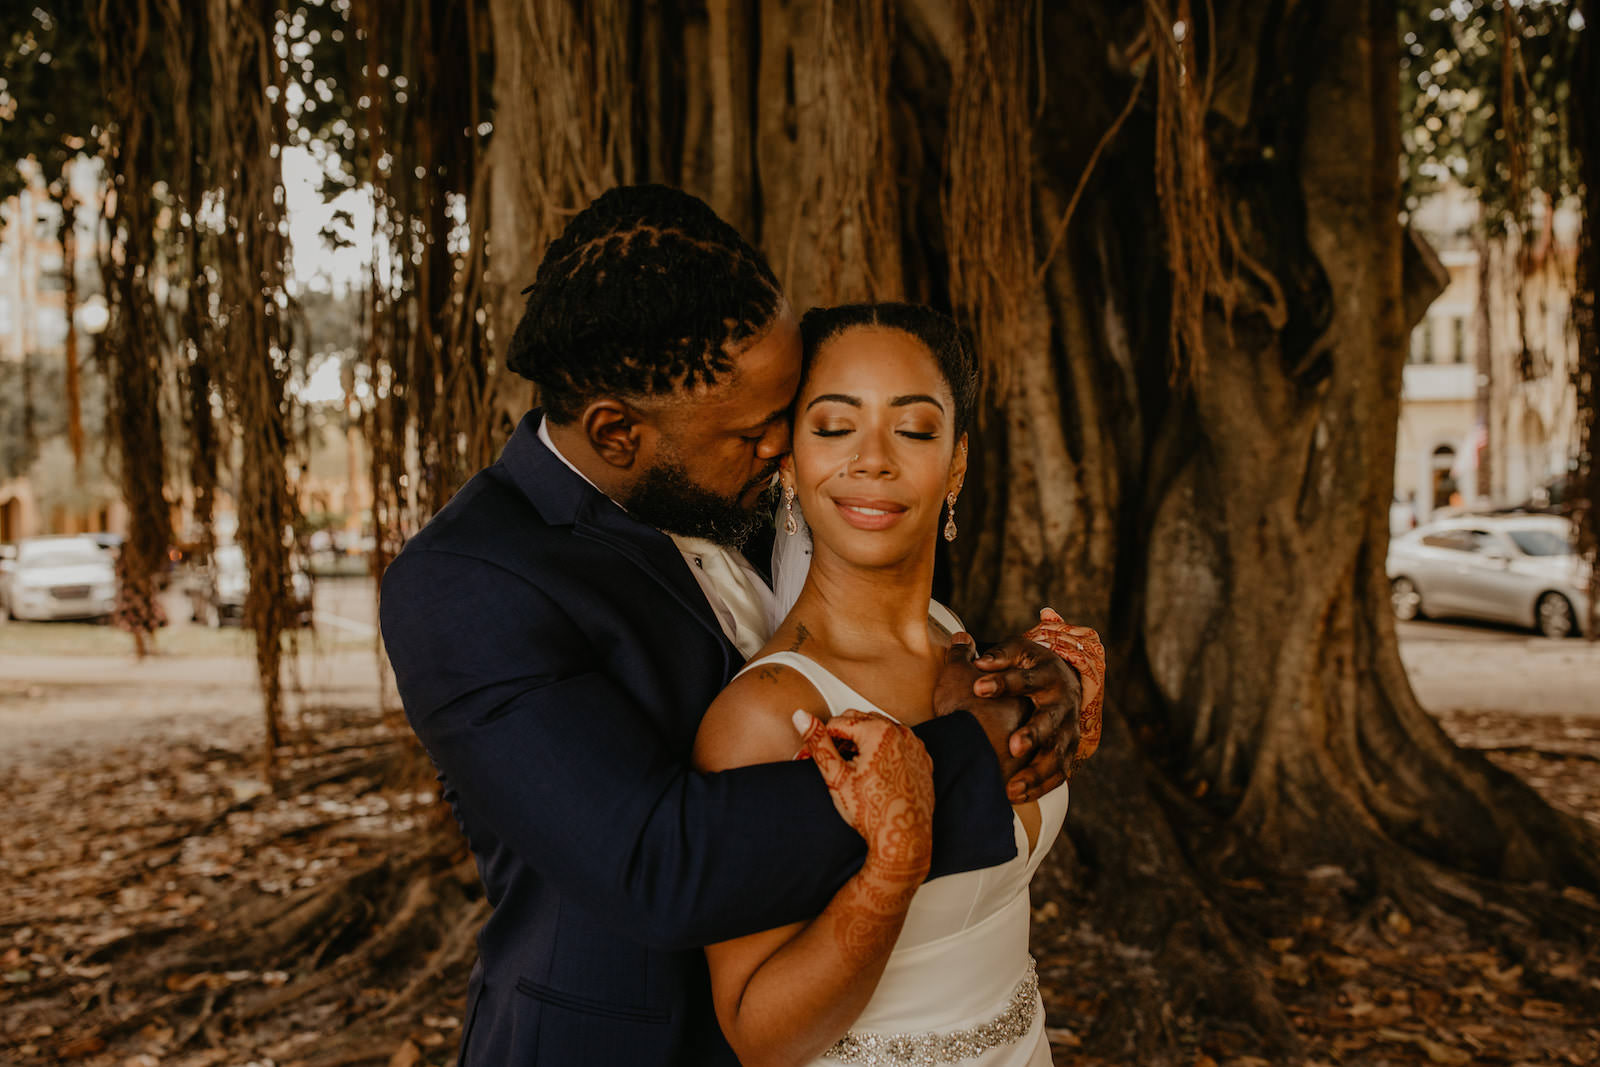 Intimate Elopement Wedding, Bride Wearing Fit and Flare Wedding Dress with Rhinestone Crystal Belt, Groom Wearing Navy Blue Suit and White Tie from Behind Under Banyan Trees, First Look Portrait